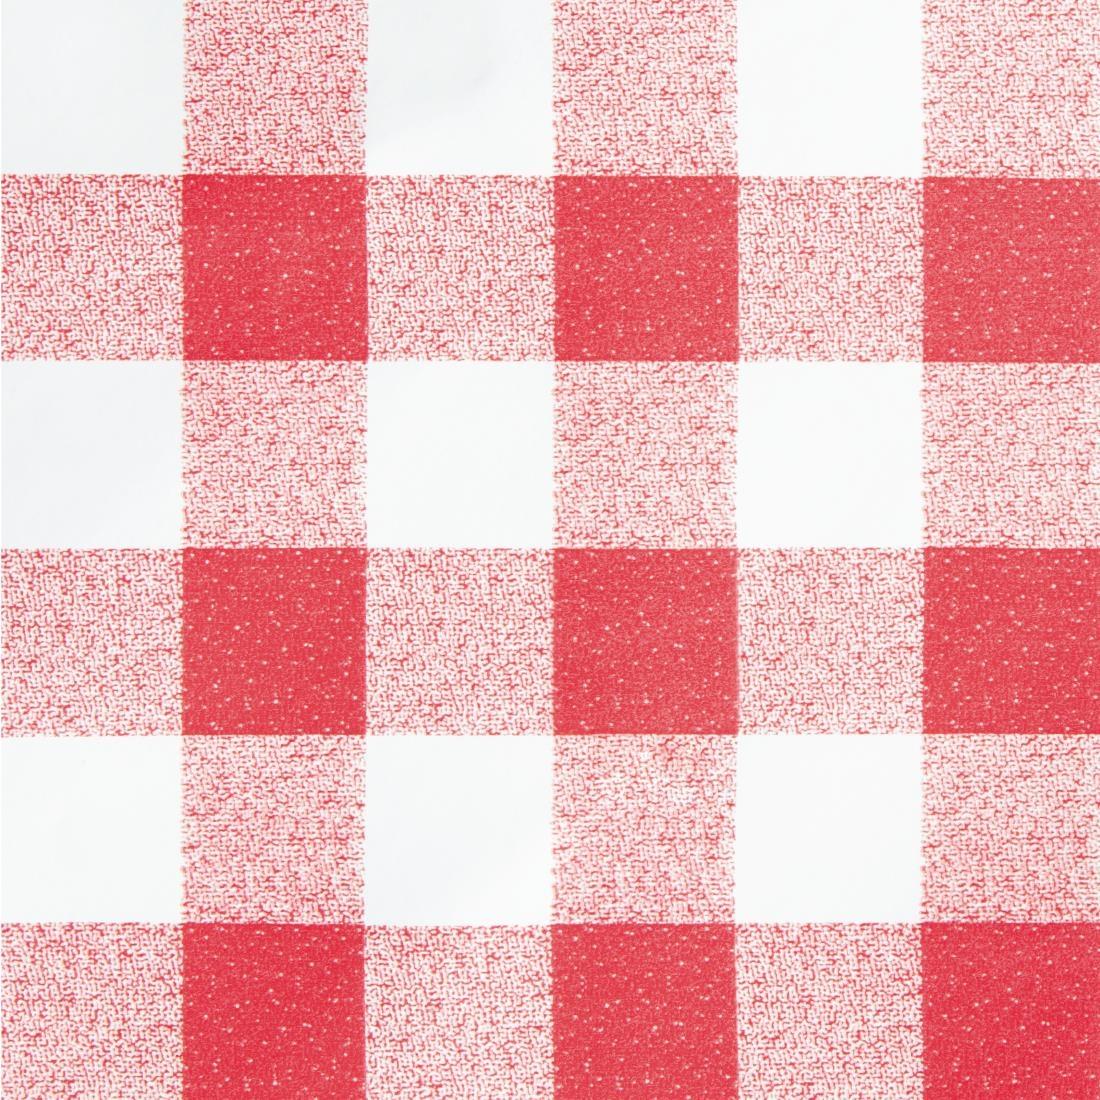 PVC Chequered Tablecloth Red 54 x90in - E795  - 2